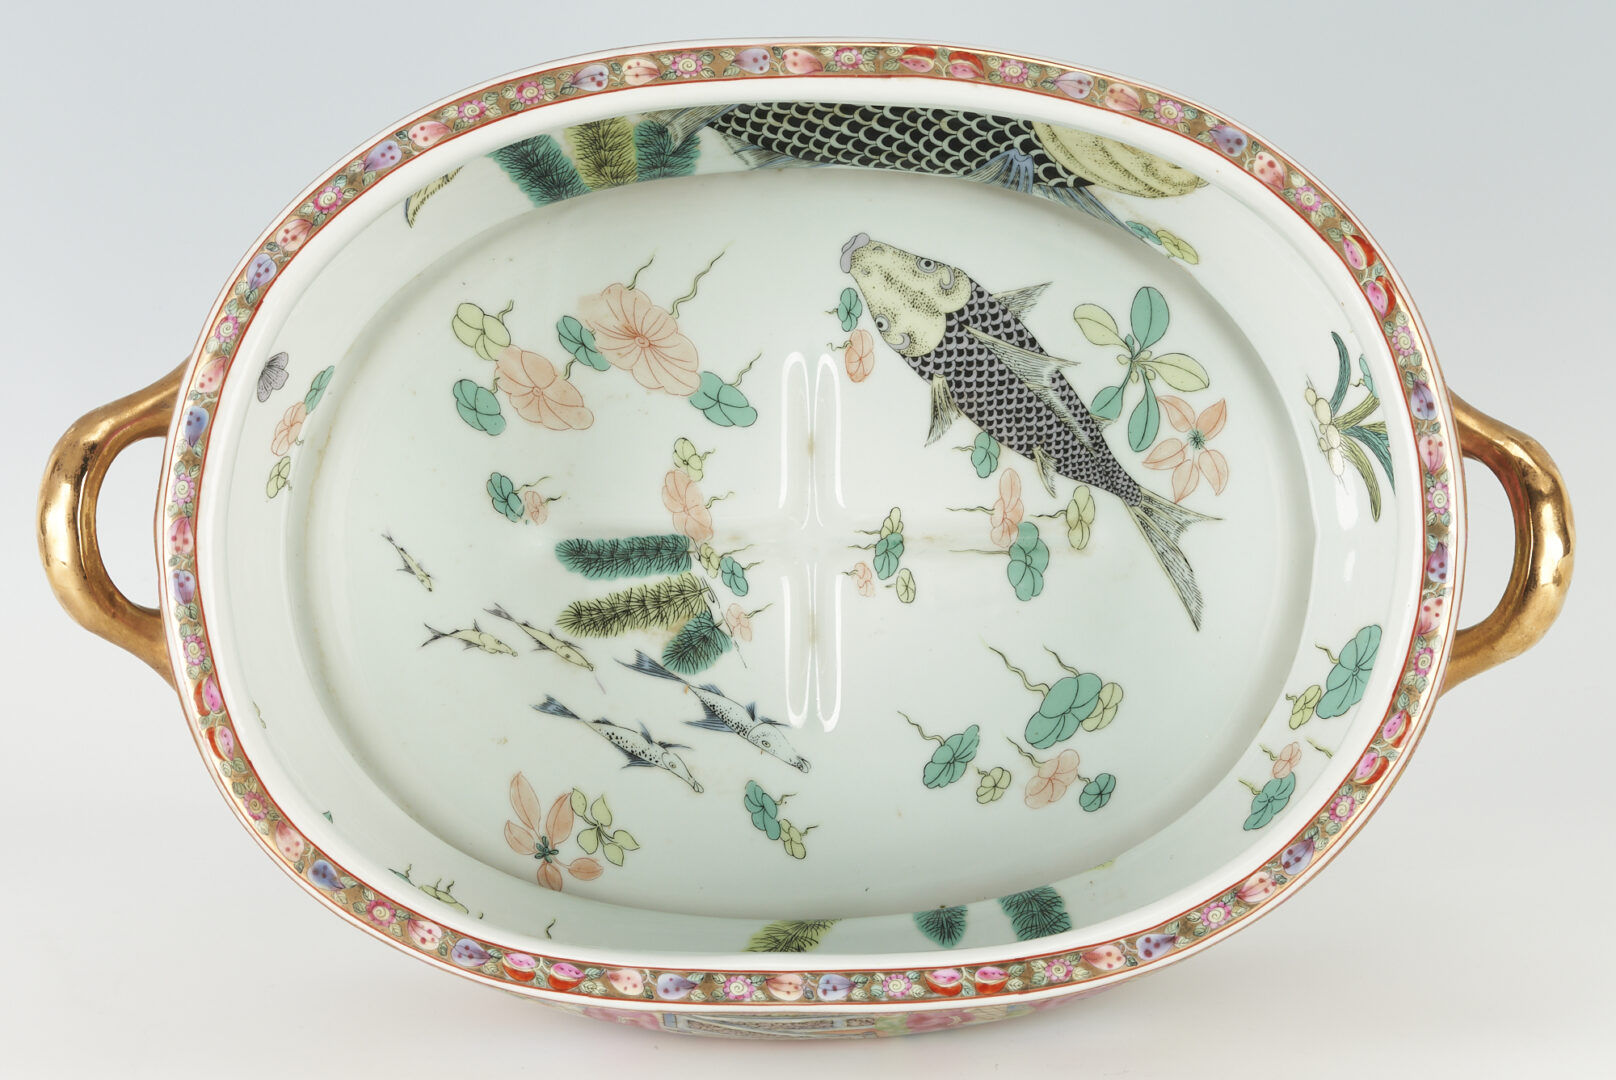 Lot 898: Chinese Rose Medallion Large Foot Bath, Fish Bowl or Jardiniere